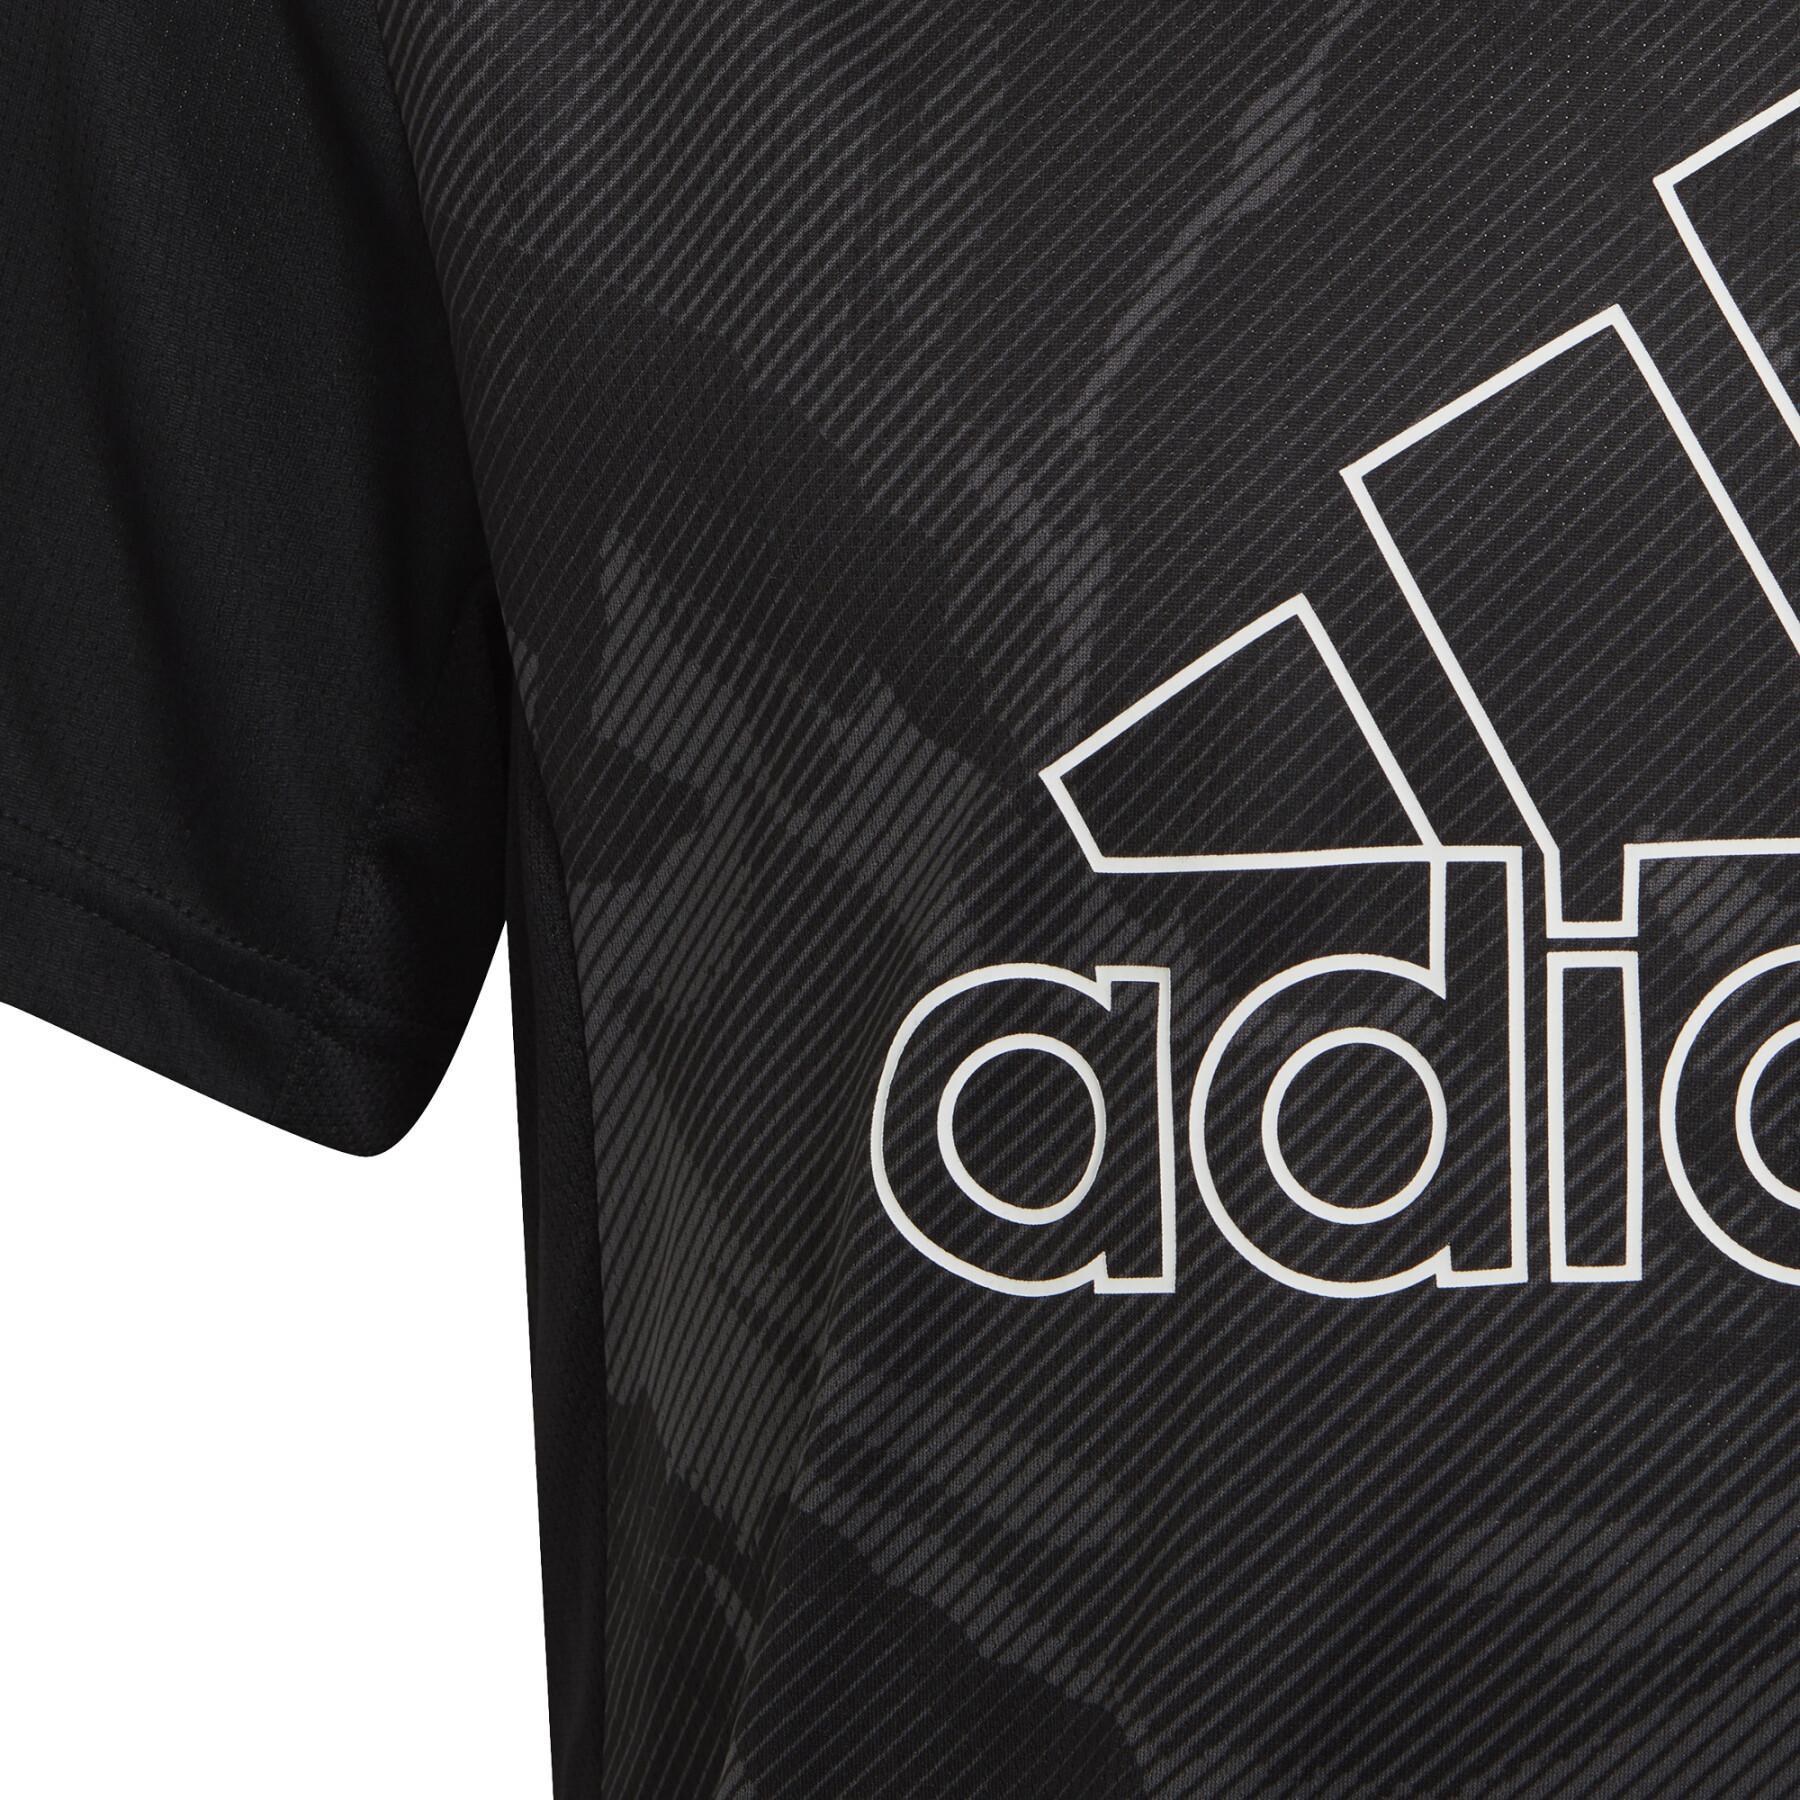 Kinder-T-Shirt adidas Designed To Move Graphic